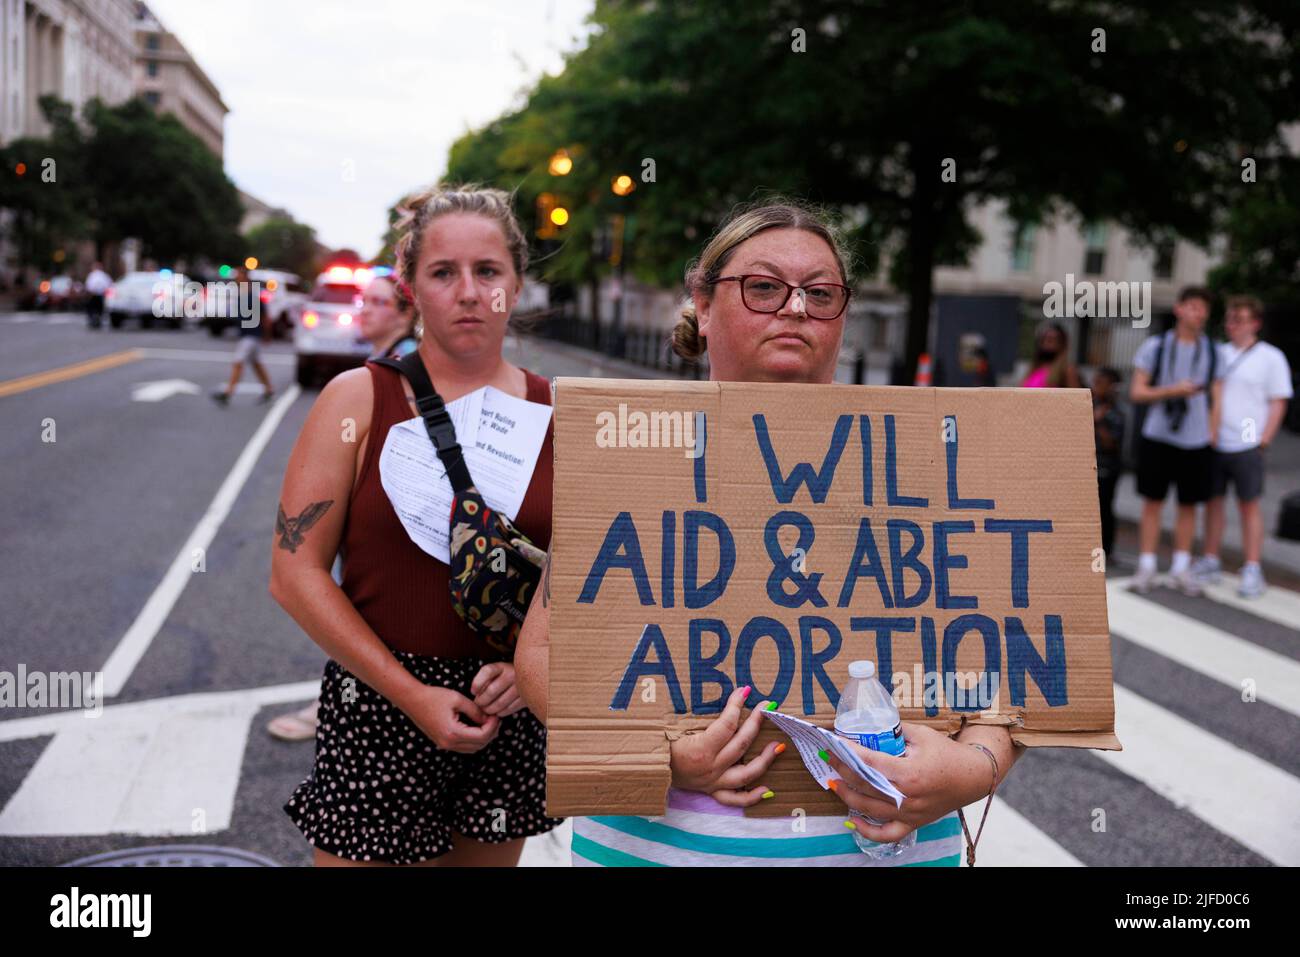 WASHINGTON, DISTRICT OF COLUMBIA - JUNE 26: An abortion-rights activist holds a sign reading, “I will aid and abet abortion,” near the White House in protest two days after a conservative majority struck down Roe v Wade, on June 26, 2022 in Washington, District of Columbia. The Court's decision in Dobbs v Jackson Women's Health overturns the landmark 50-year-old Roe v Wade case and erases a federal right to an abortion. Stock Photo